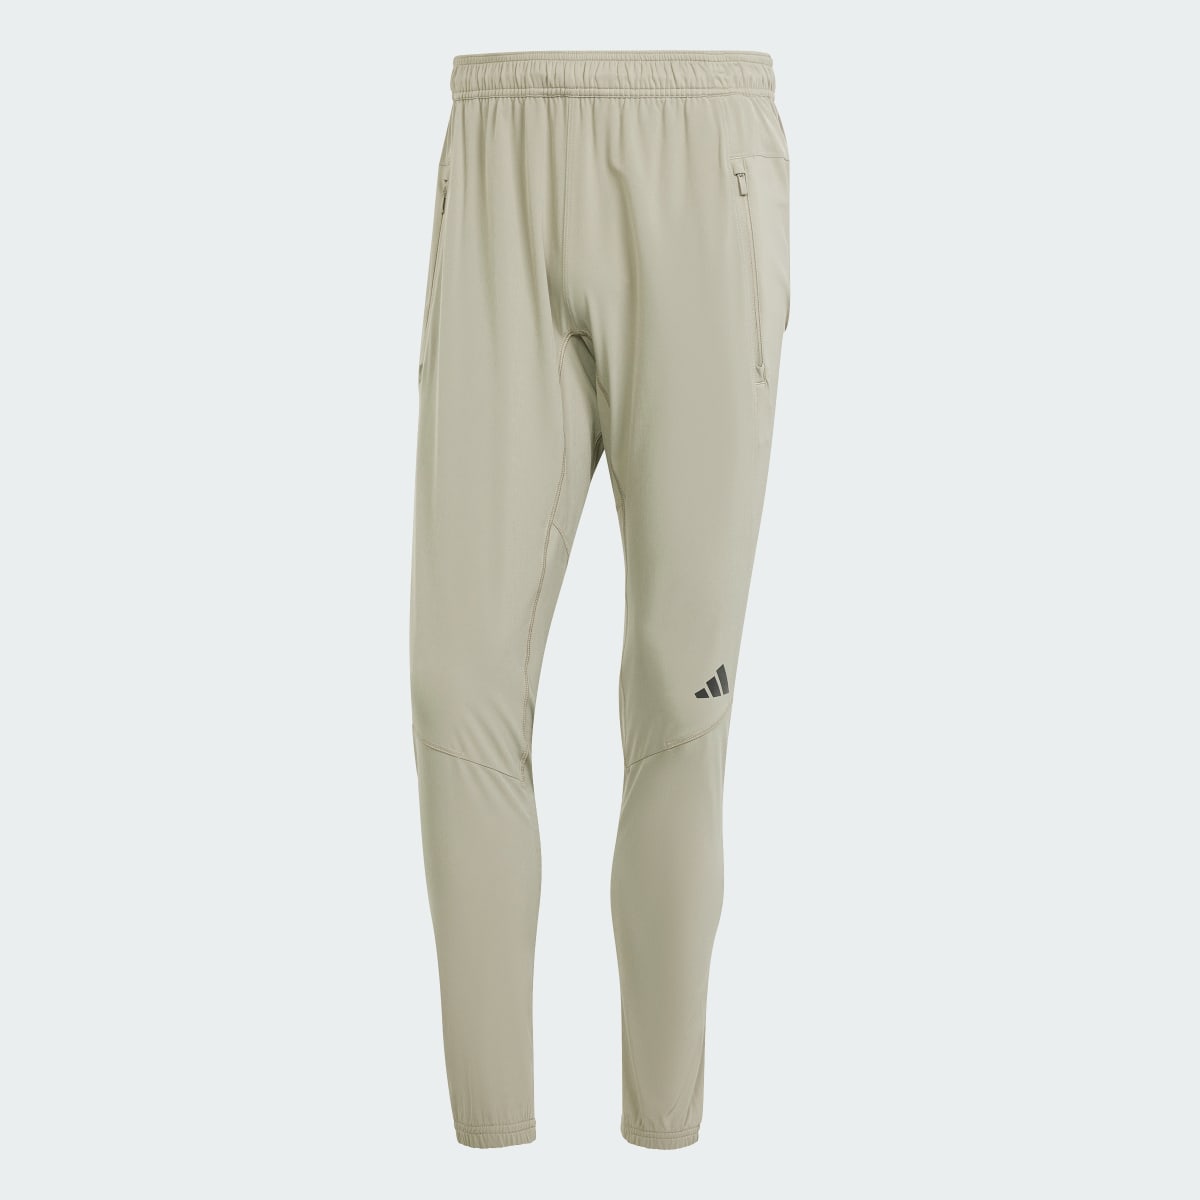 Adidas Designed for Training Workout Joggers. 4